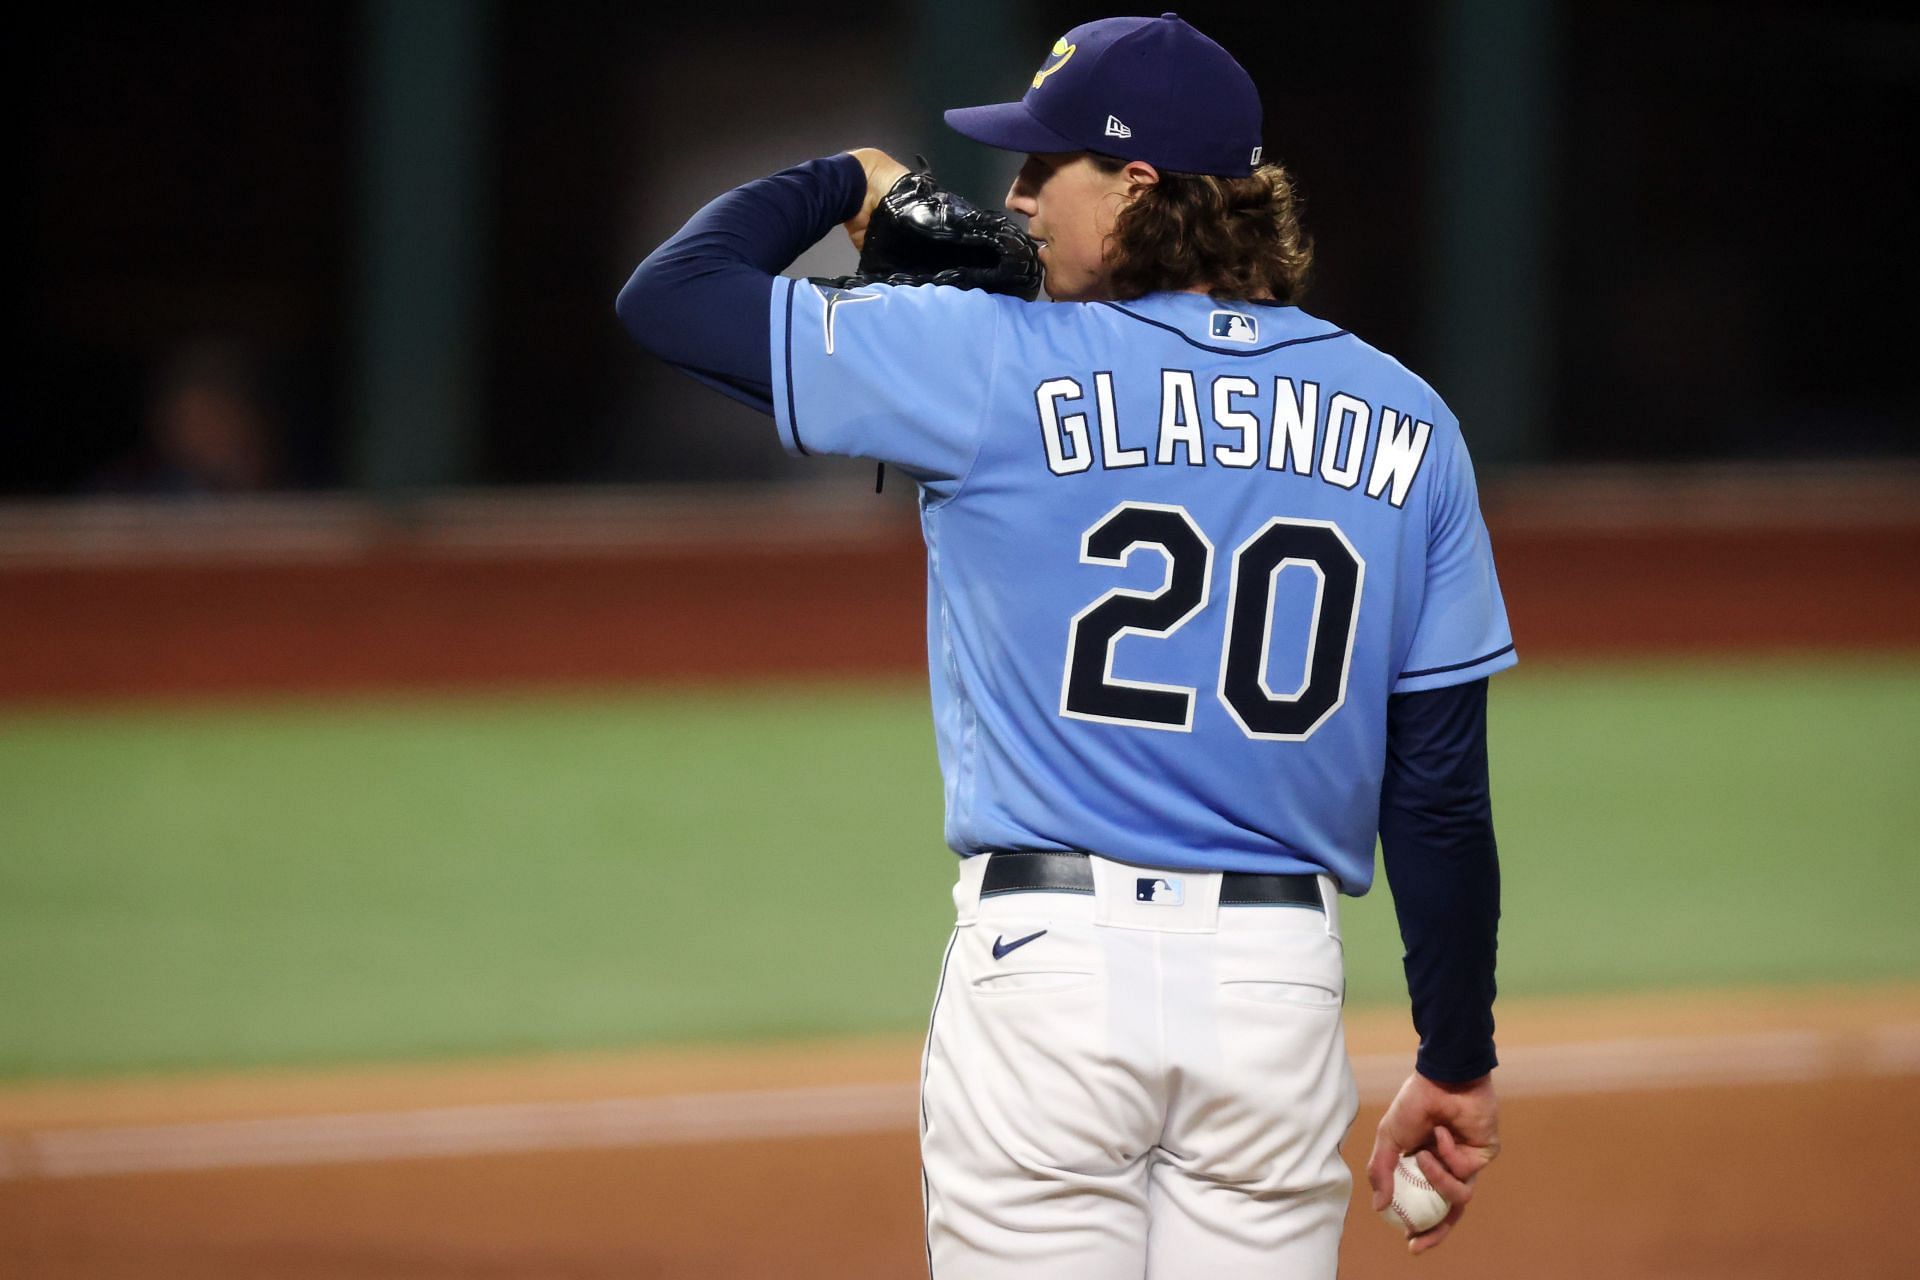 Tampa Bay Rays reportedly avoid arbitration with Tyler Glasnow and